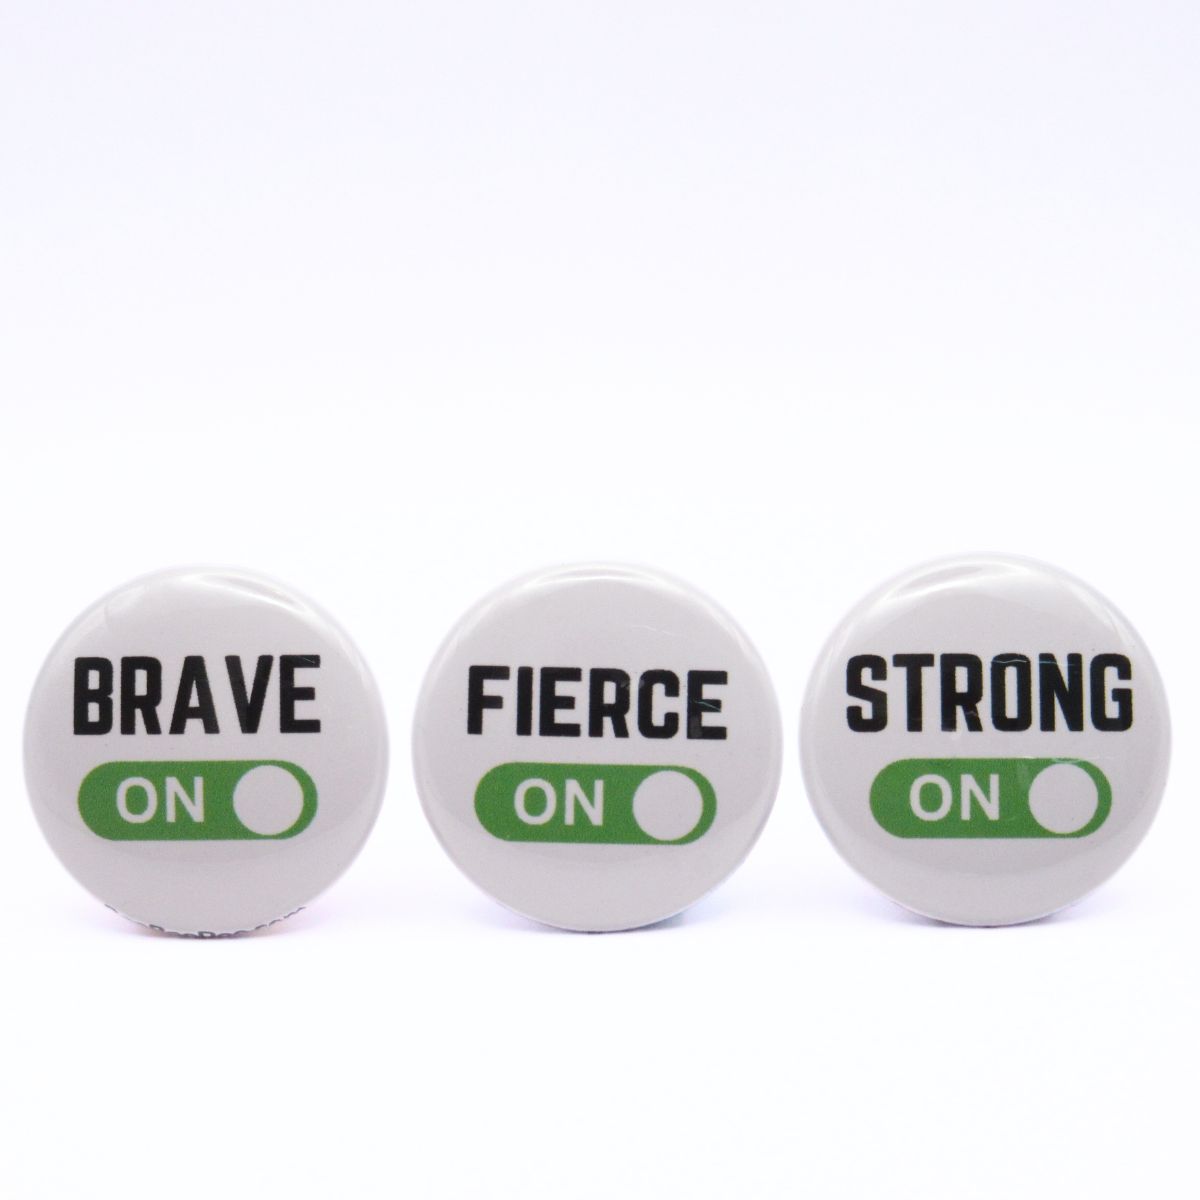 BooBooRoo Pinback Button (i.e. button, badge, pin) 3-pack displaying brave, fierce, and strong modes are on. Green background for mode indicator.